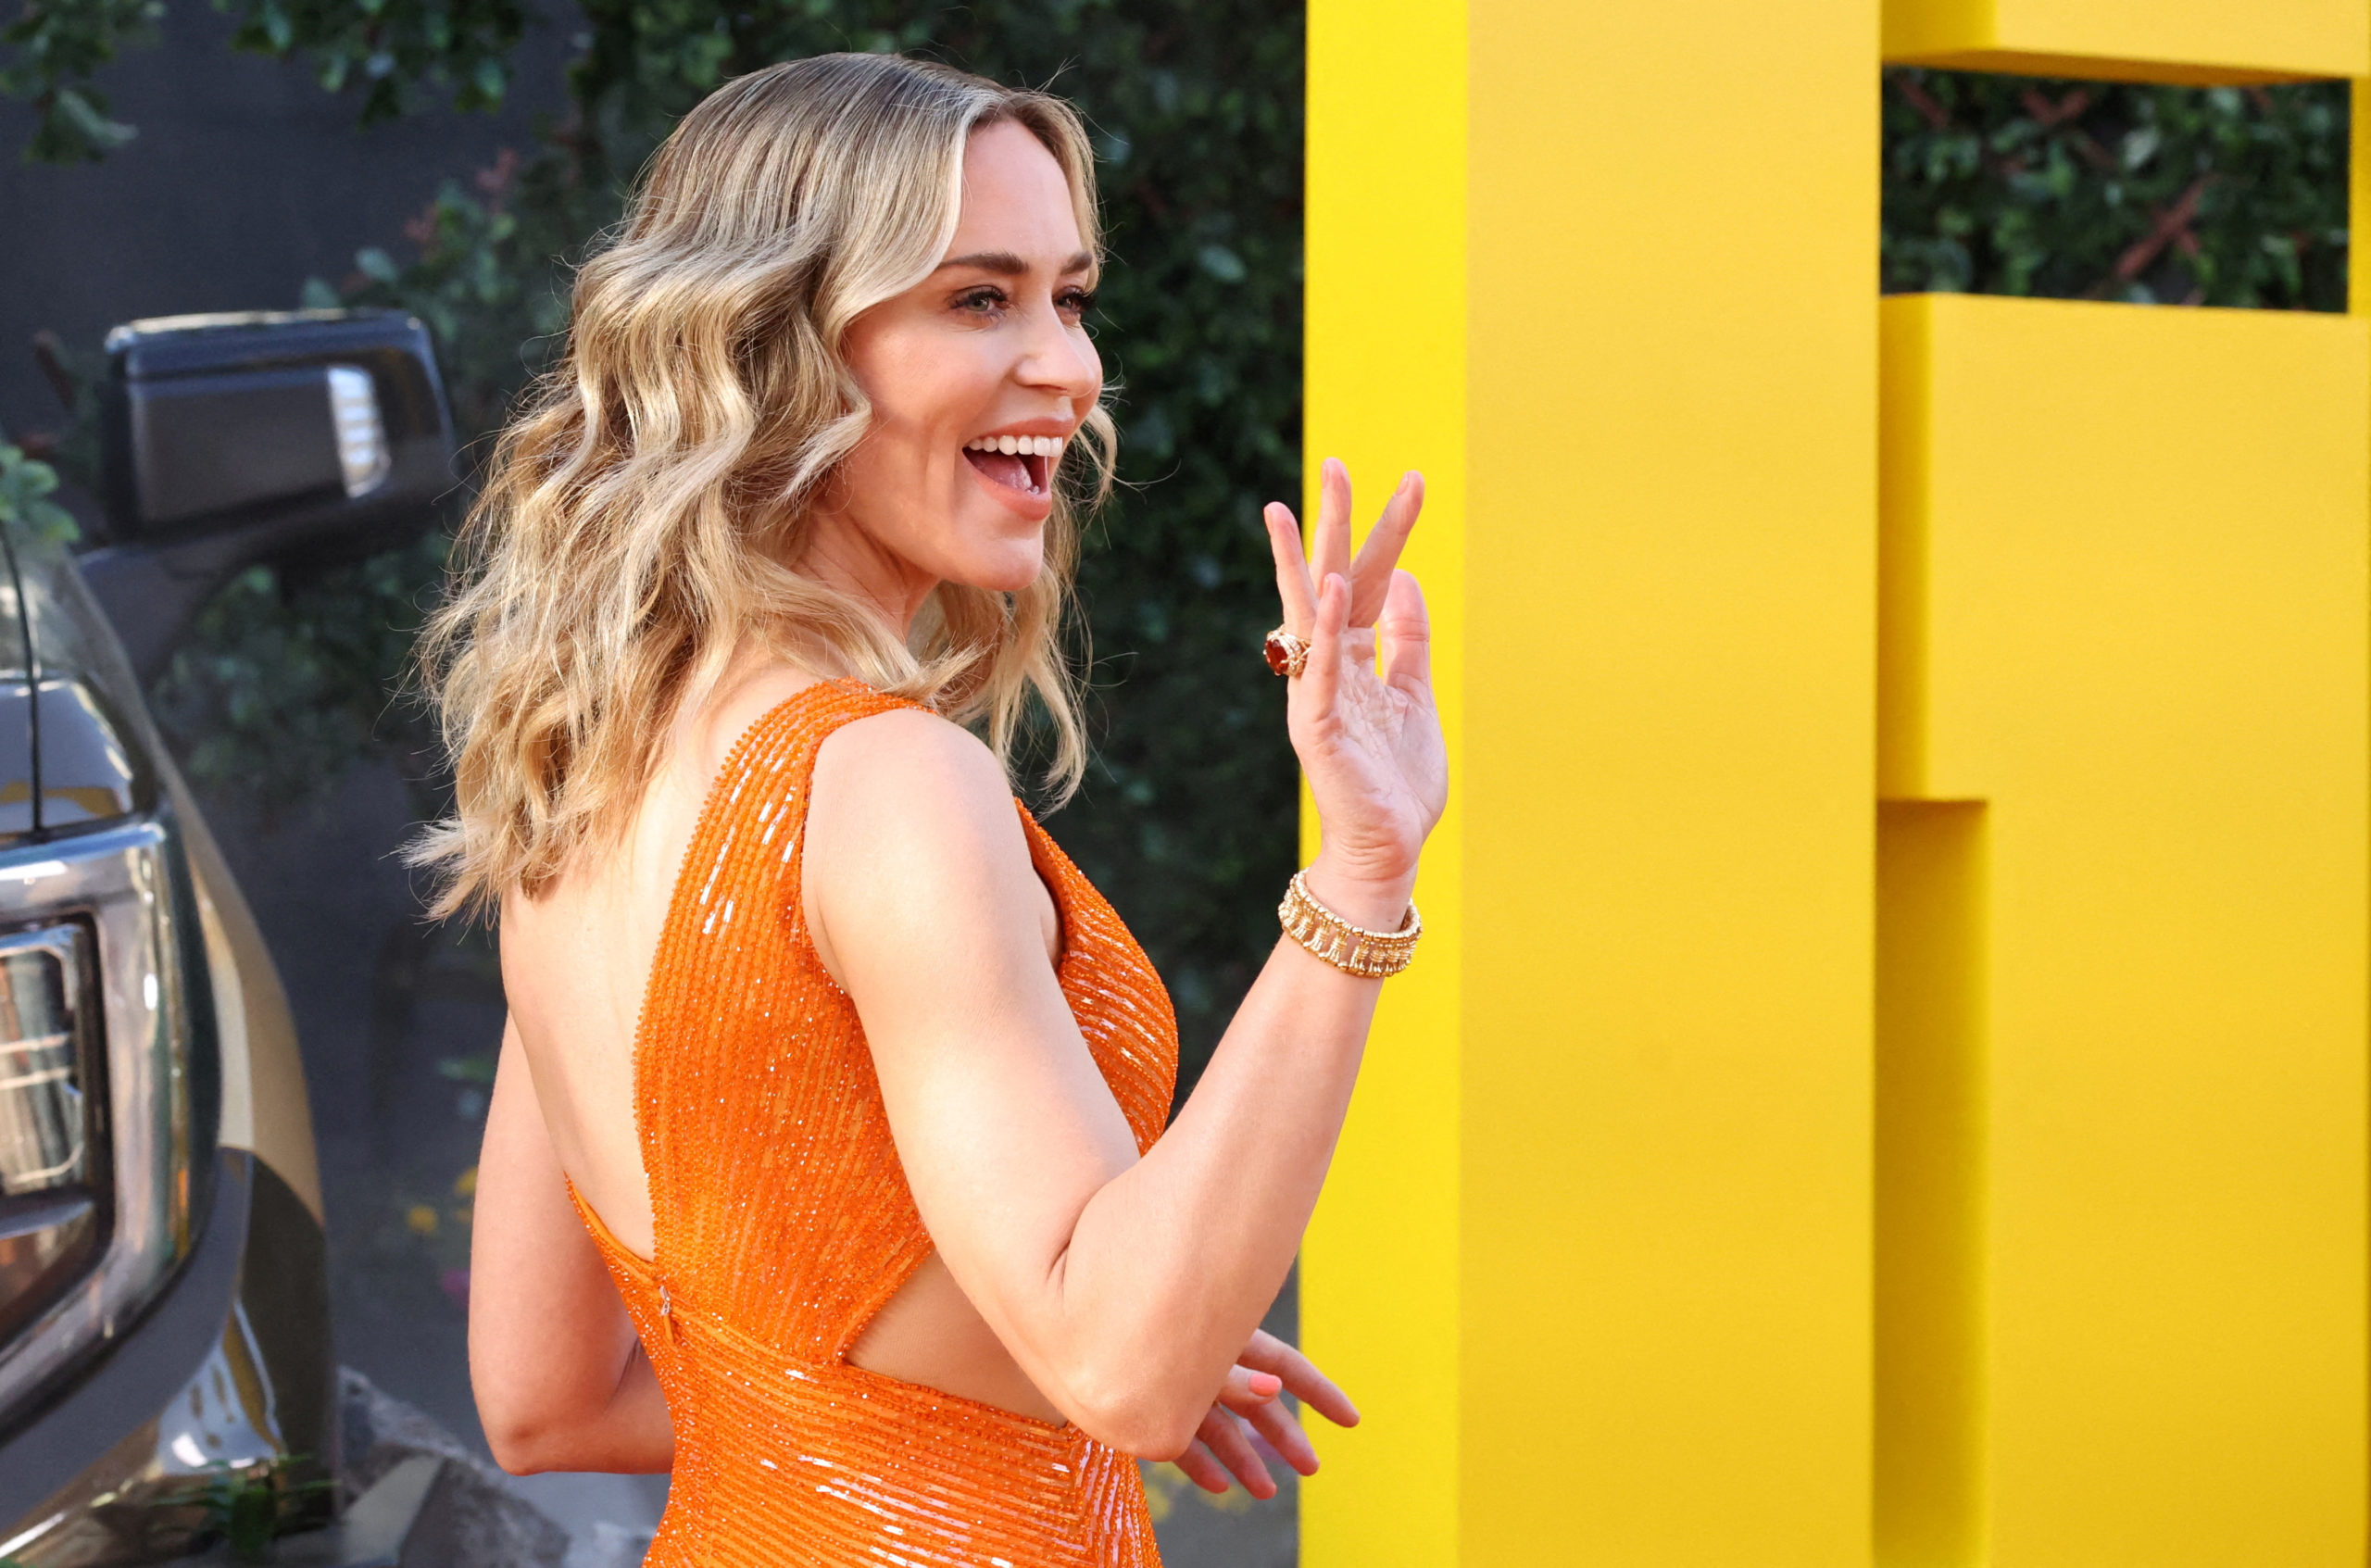 Cast member Emily Blunt attends a premiere for the film "The Fall Guy" in Los Angeles, California, U.S. April 30, 2024. REUTERS/Mario Anzuoni REFILE - CORRECTING ID FROM "TERESA PALMER" TO "EMILY BLUNT